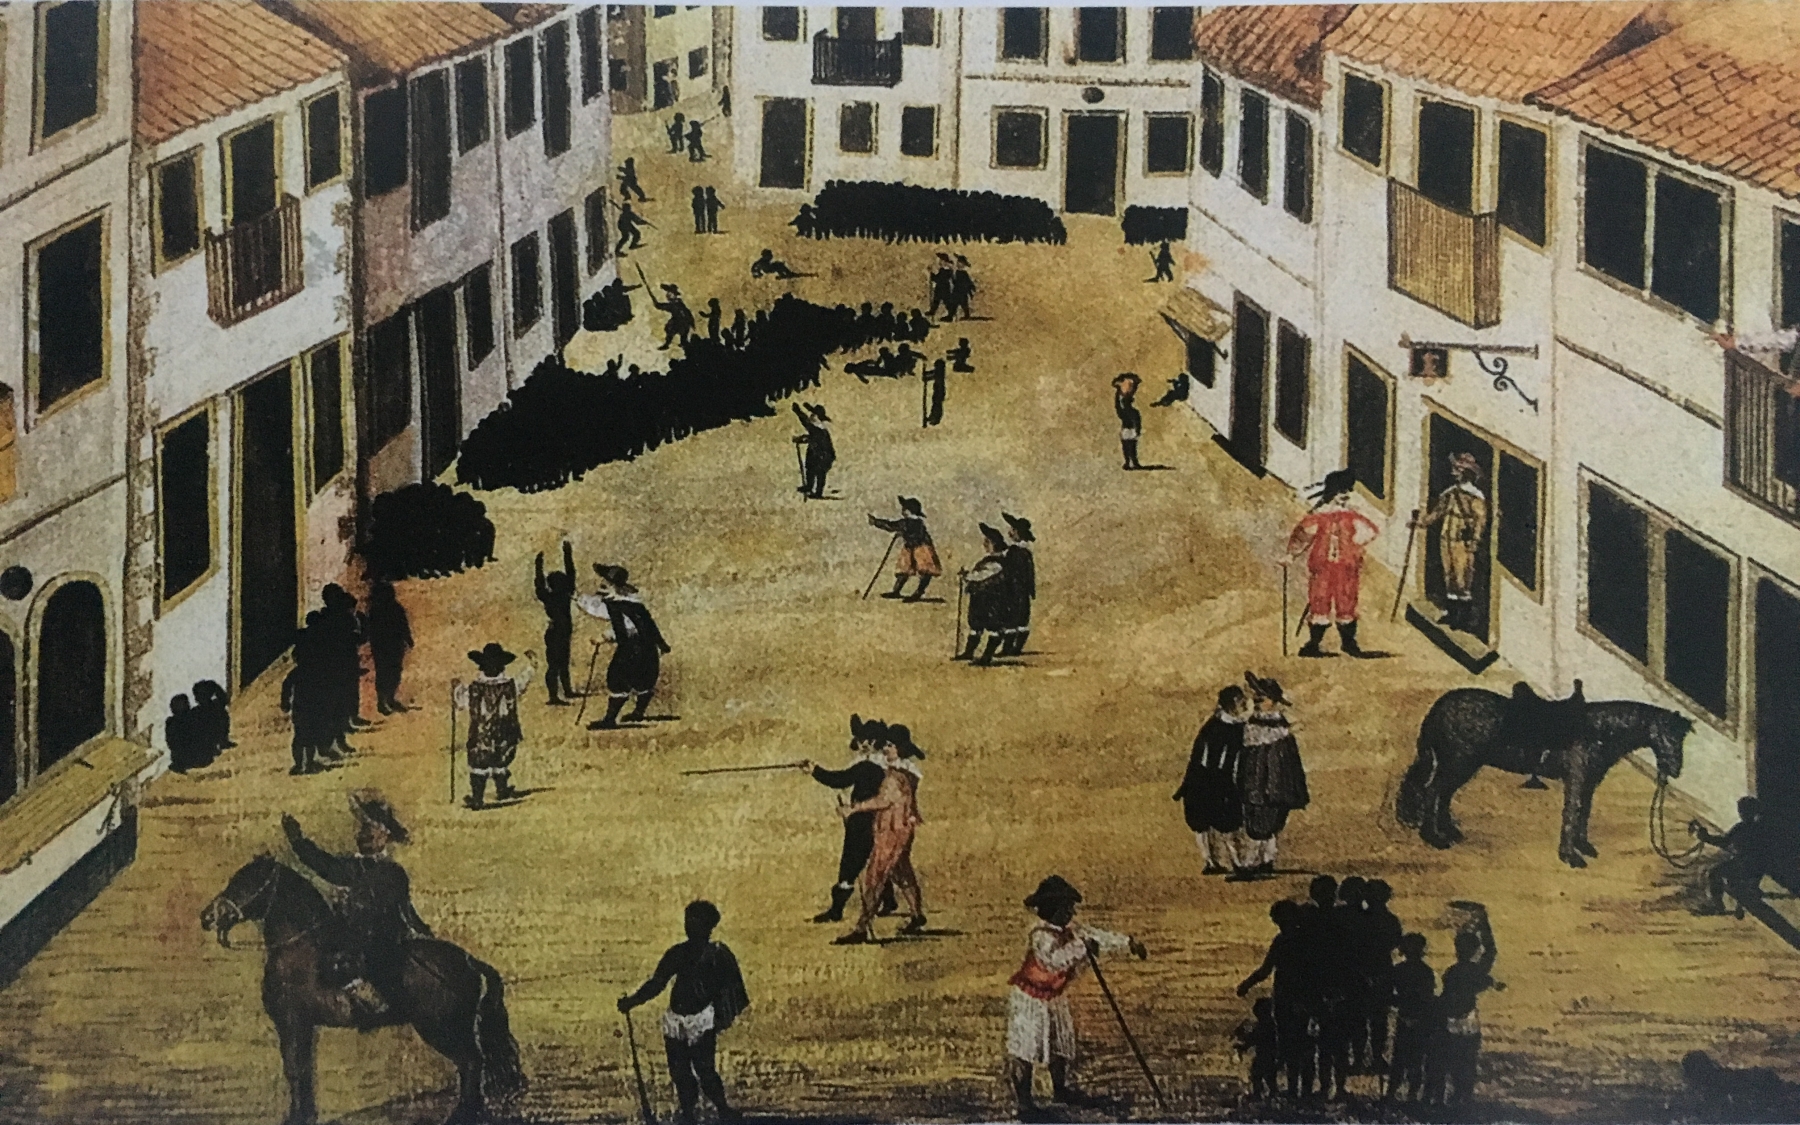 From De Beijer&#39;s research archive: Zacharias Wagner, &quot;Mercado de escravos no Recife (Slave market in Recife)&quot;, c. &nbsp;1637-1644. Recife, founded in 1537, was the first slave port in the Americas during the early Portuguese colonization of Brazil. It was known for its large scale production of sugar cane.